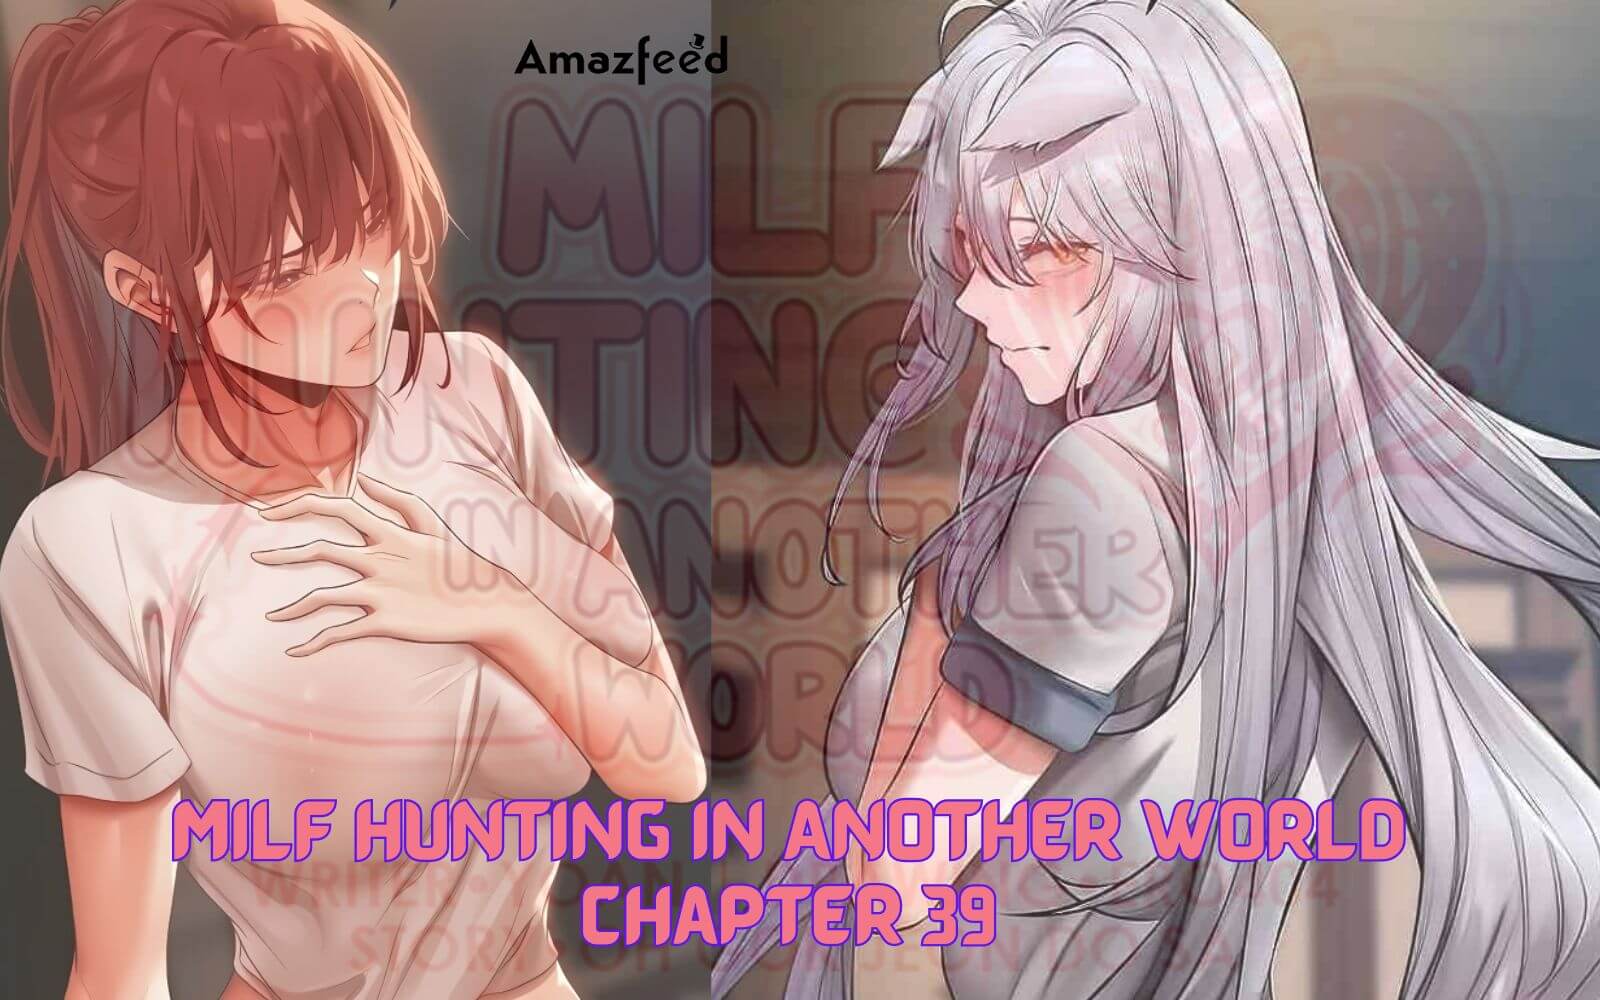 MILF Hunting In Another World Chapter 39 Spoiler Leaked